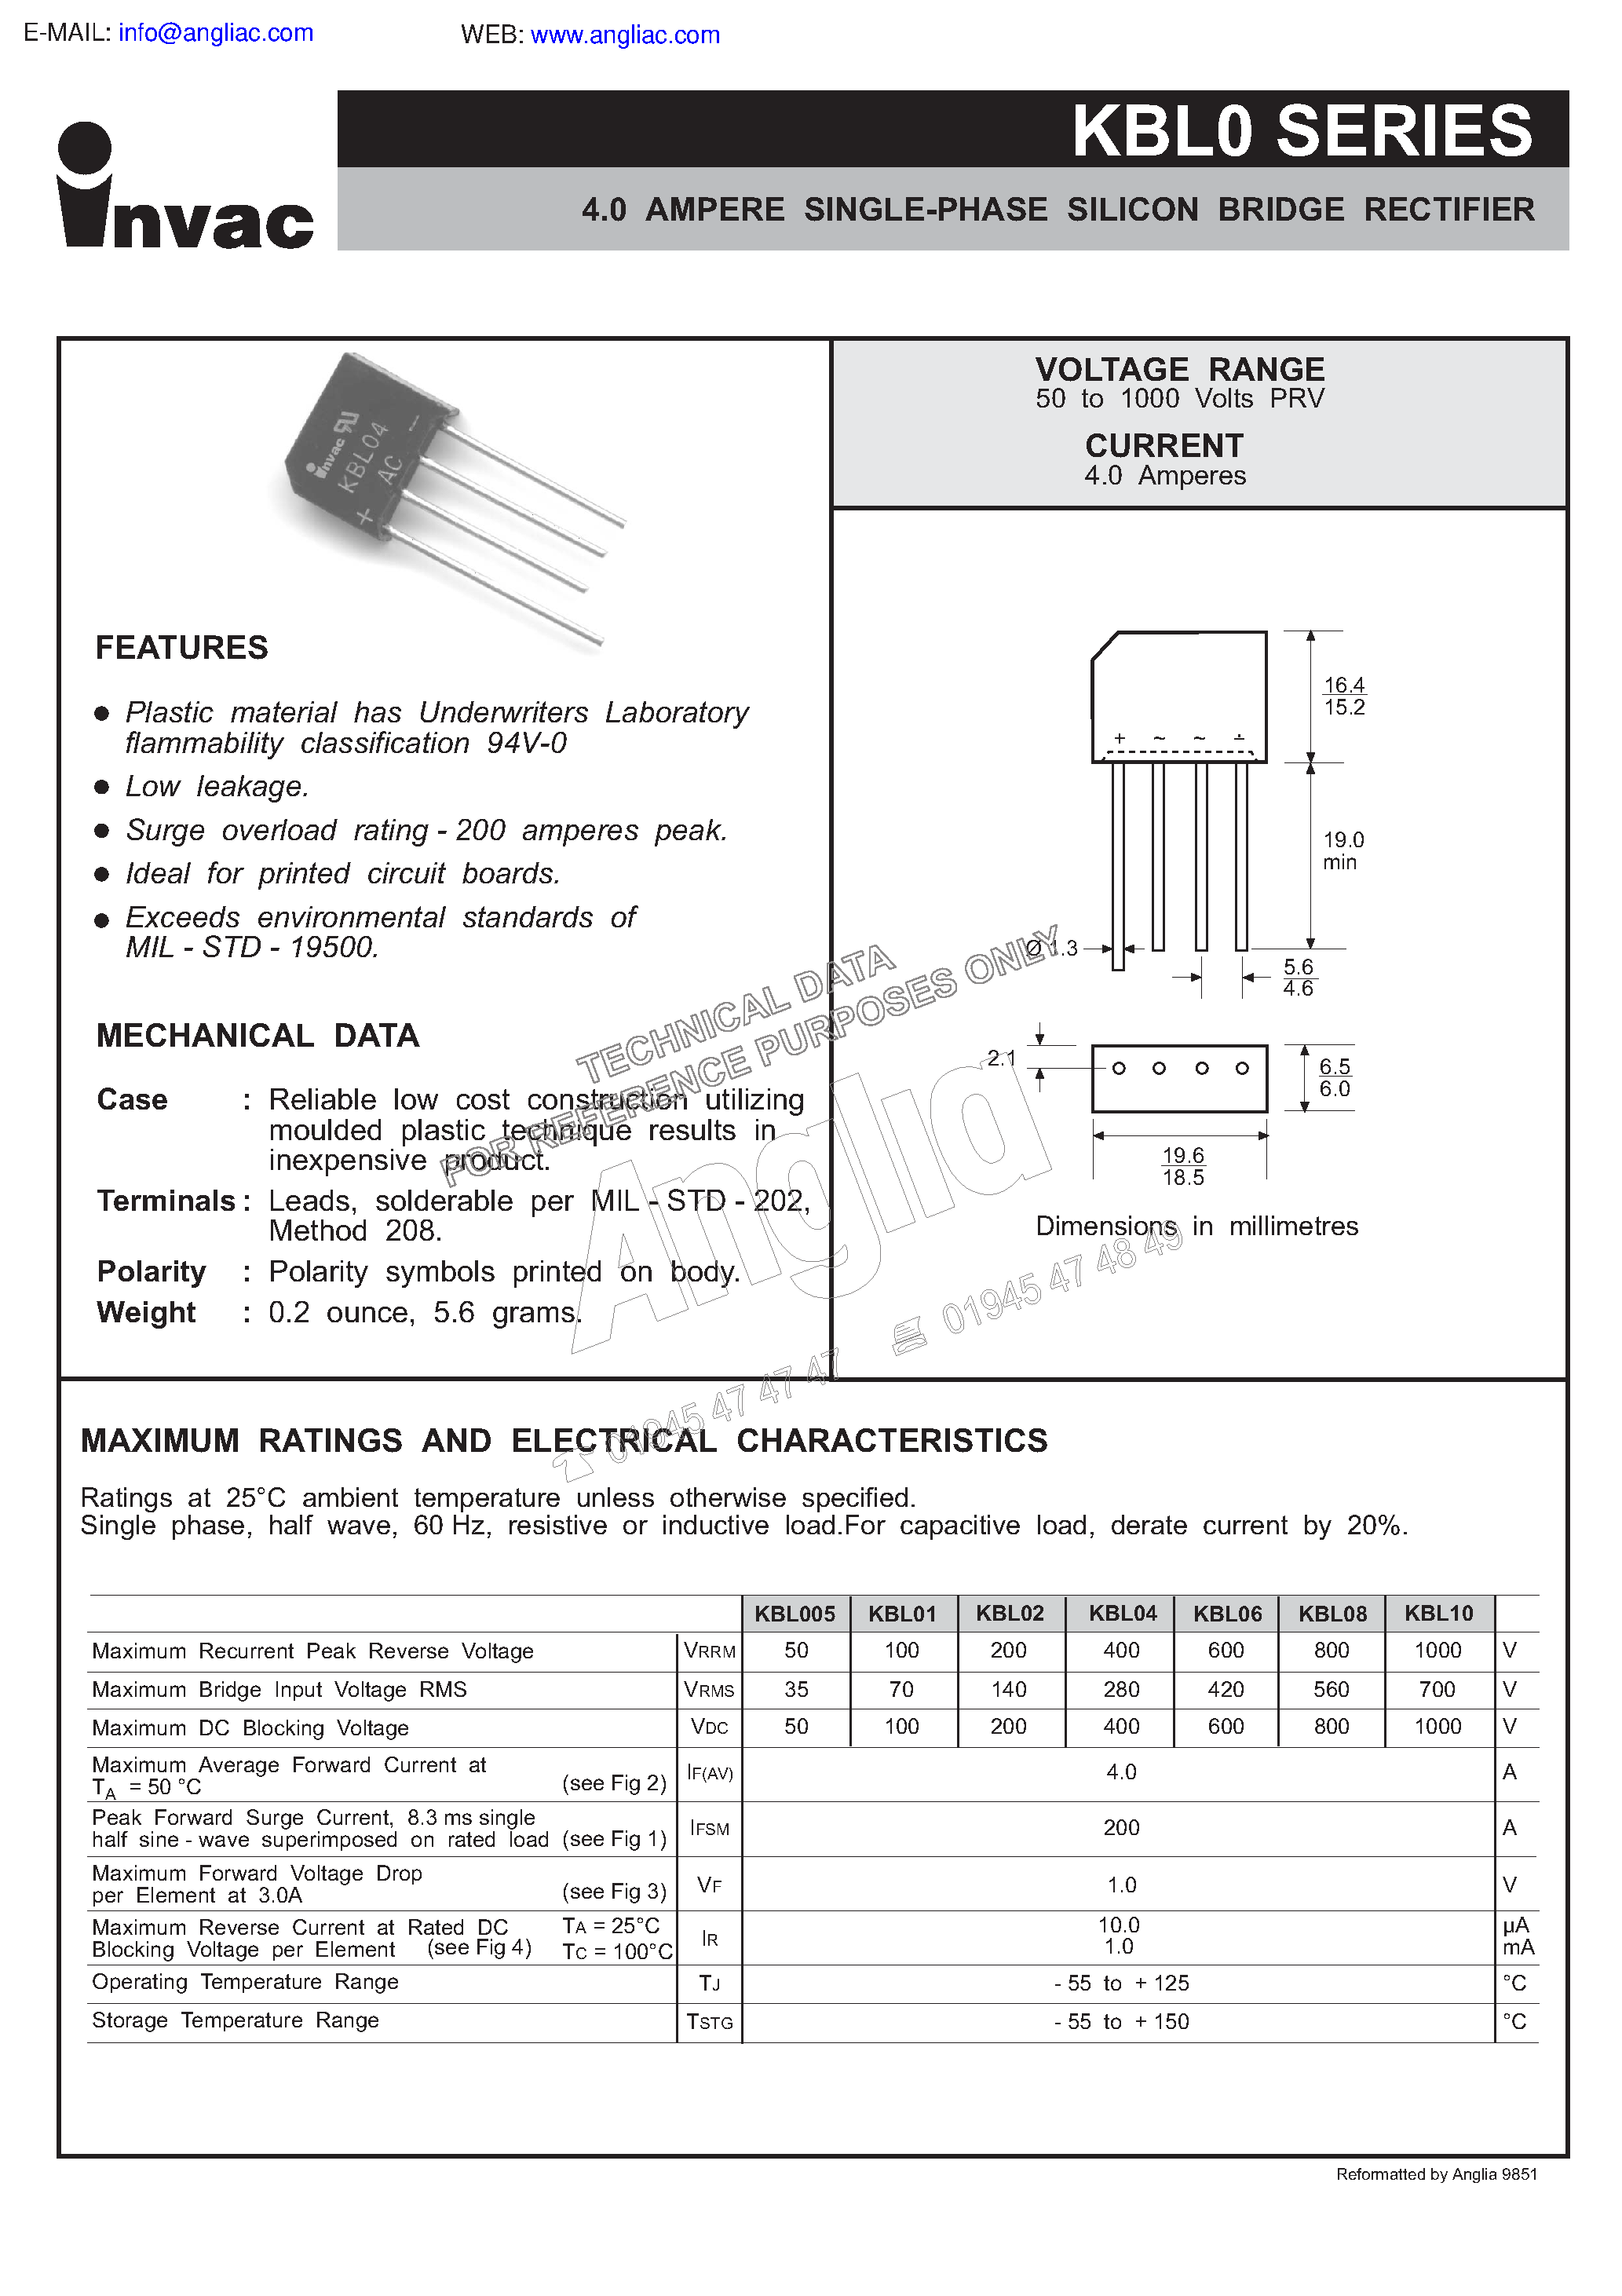 Даташит KBL005 - 4.0 AMPERE SINGLE-PHASE SILICON BRIDGE RECTIFIER страница 1